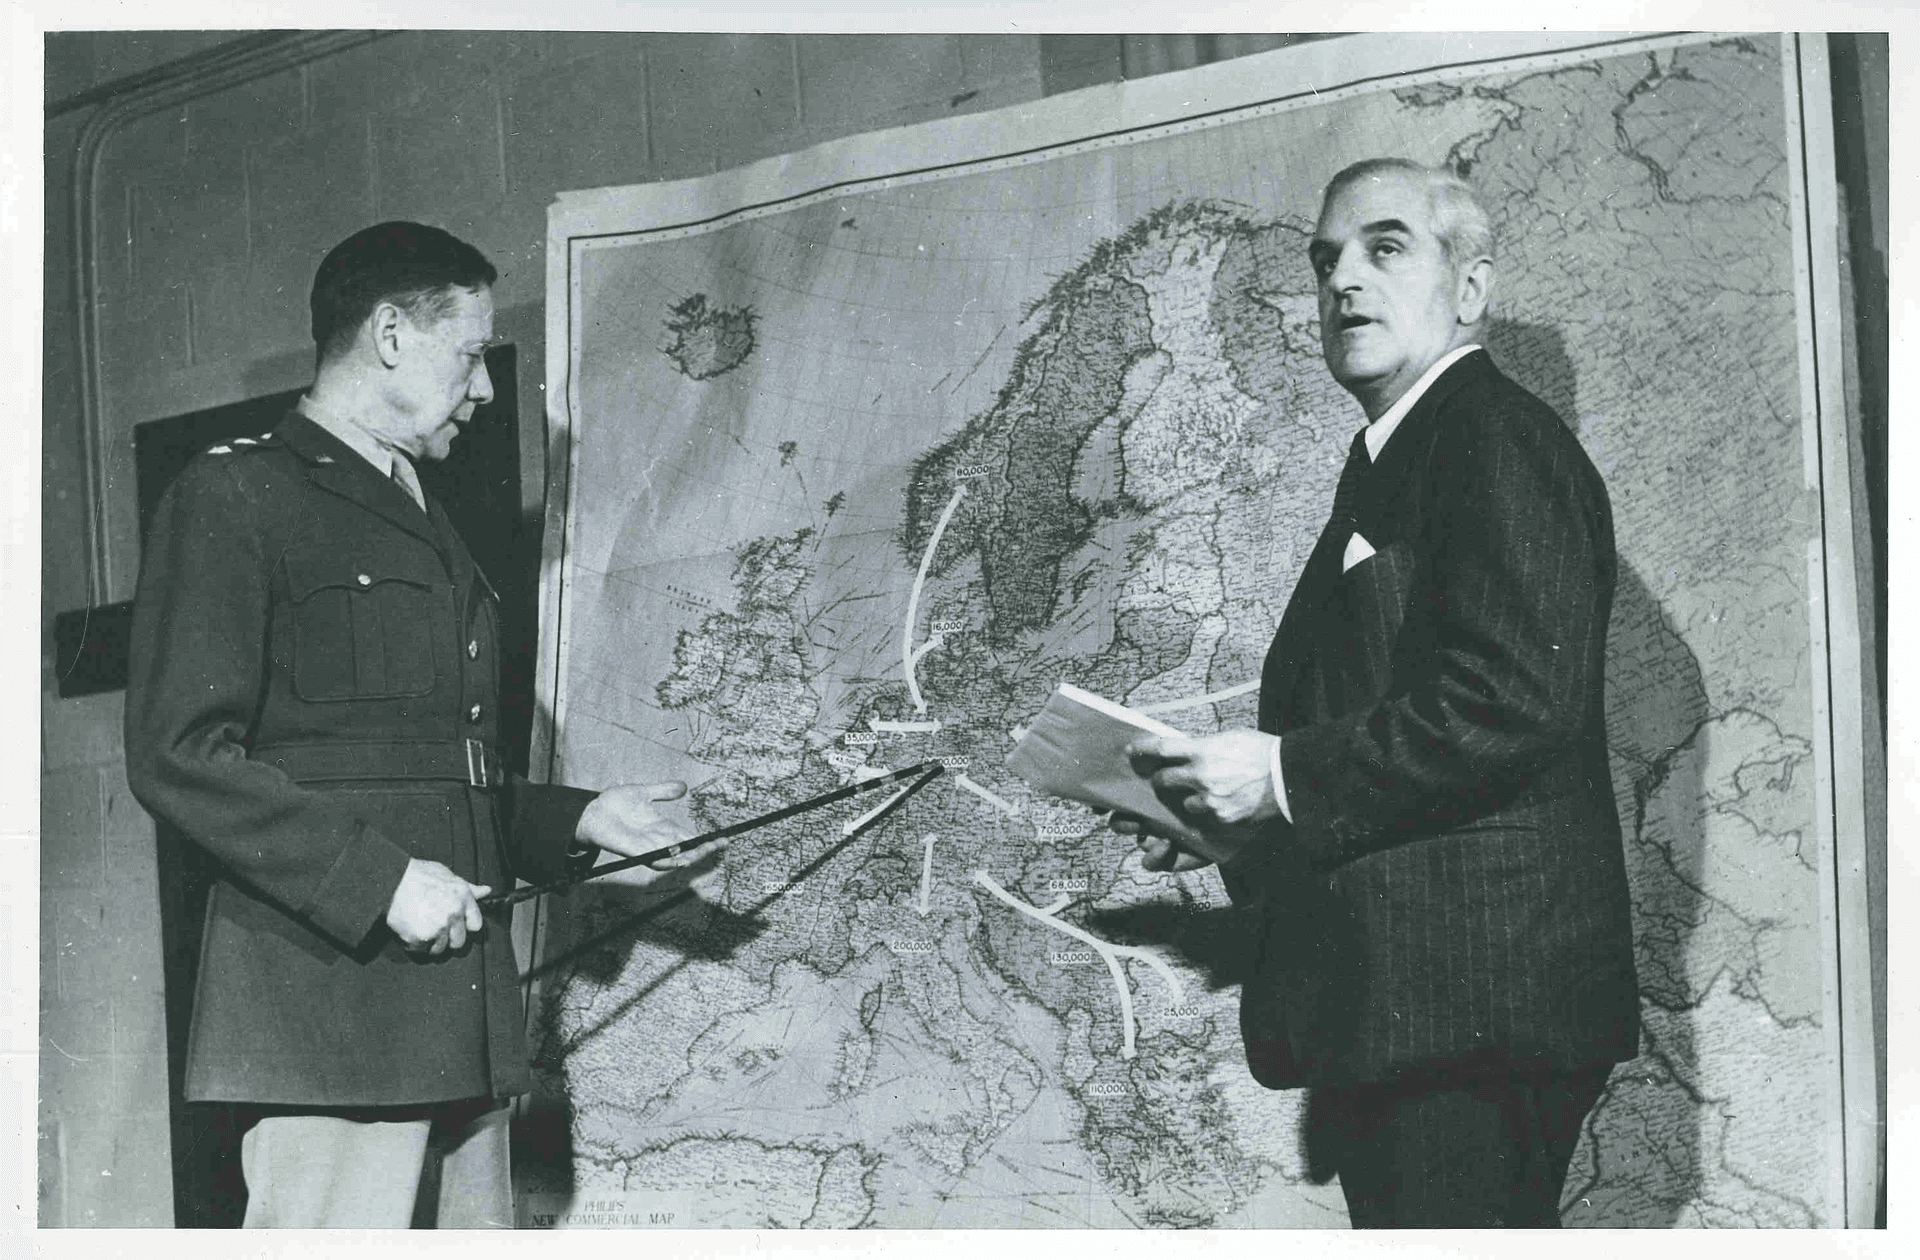 Two men point and look at a map, in black and white